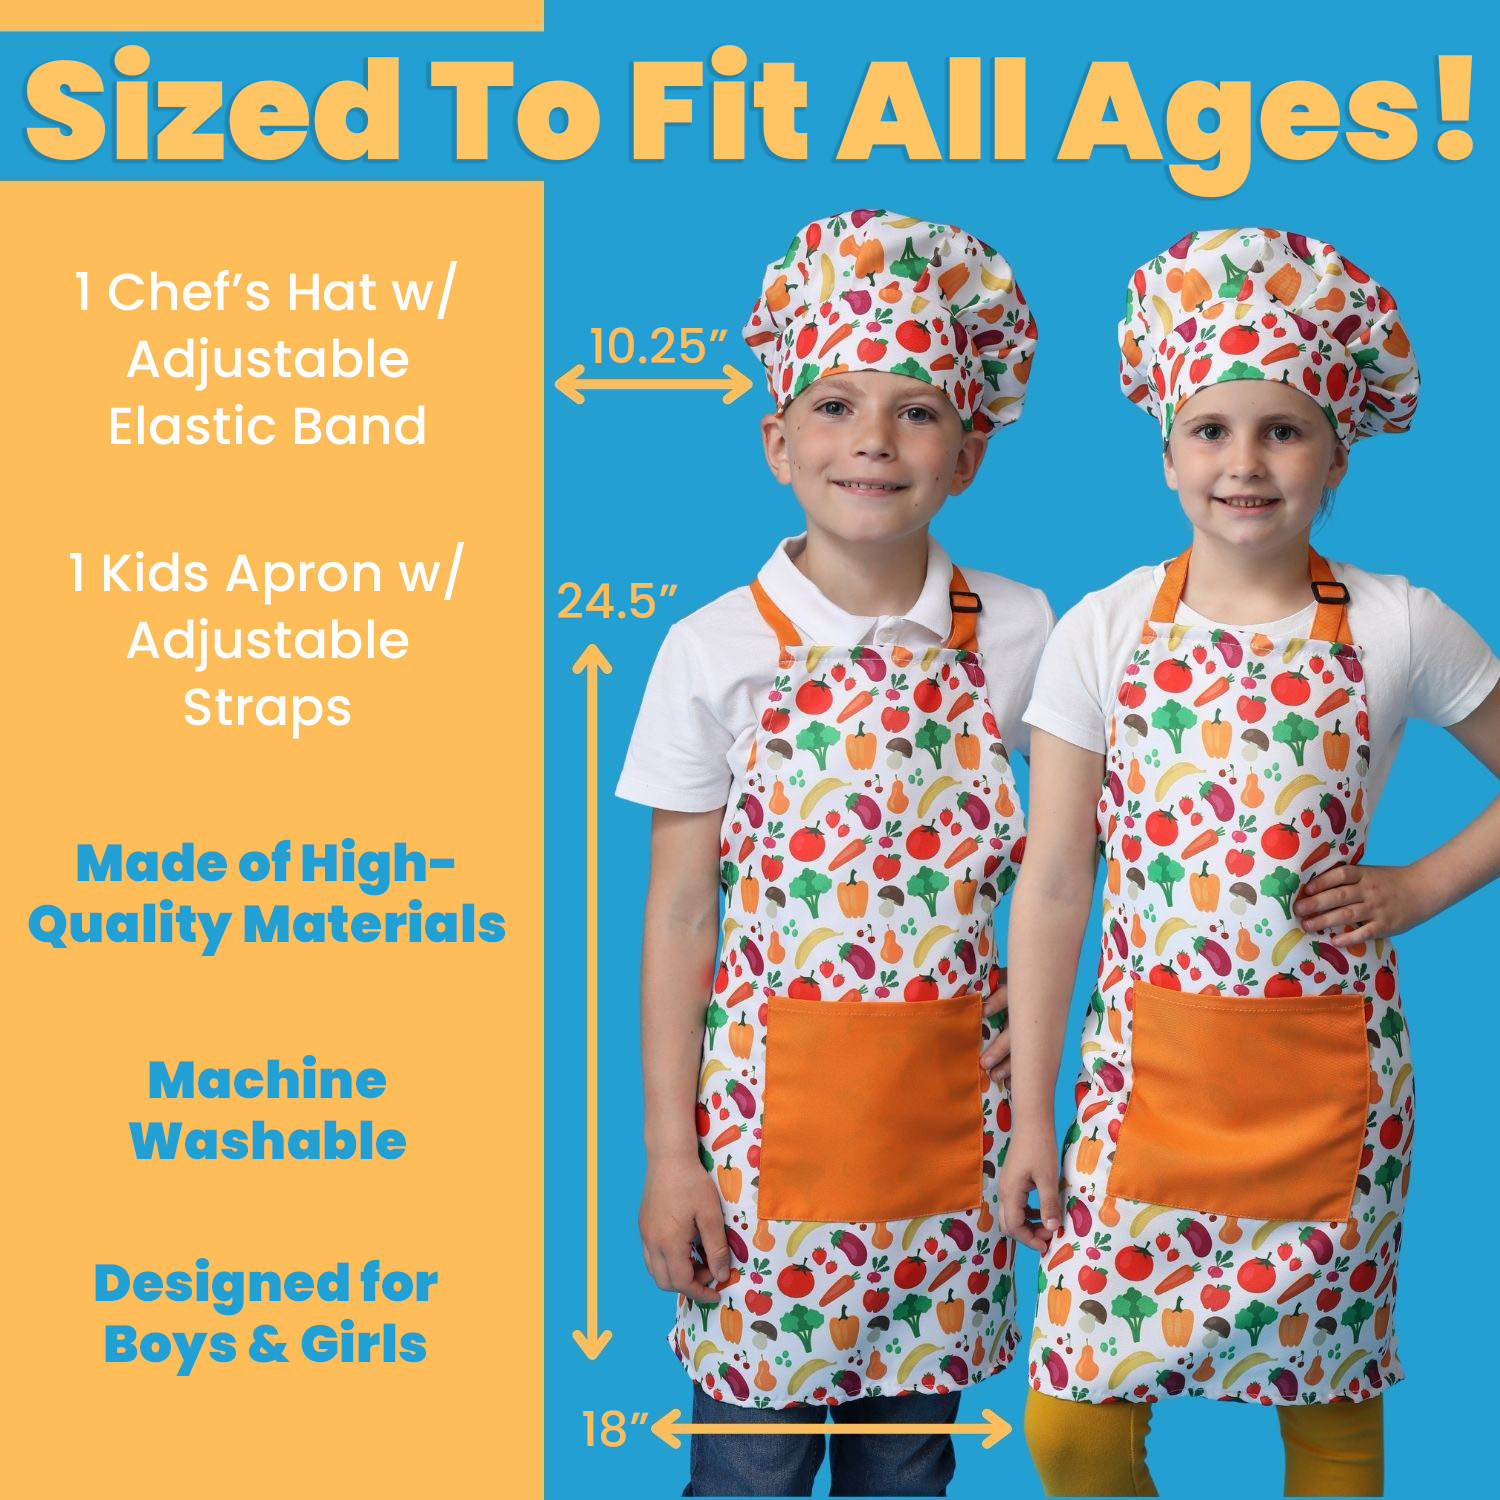 RiseBrite Real Kids Cooking Set With Vegetable Apron - Sized to Fit All Ages. 10.25 inch adjustable hat, 24.5 by 18 inch adjustable apron